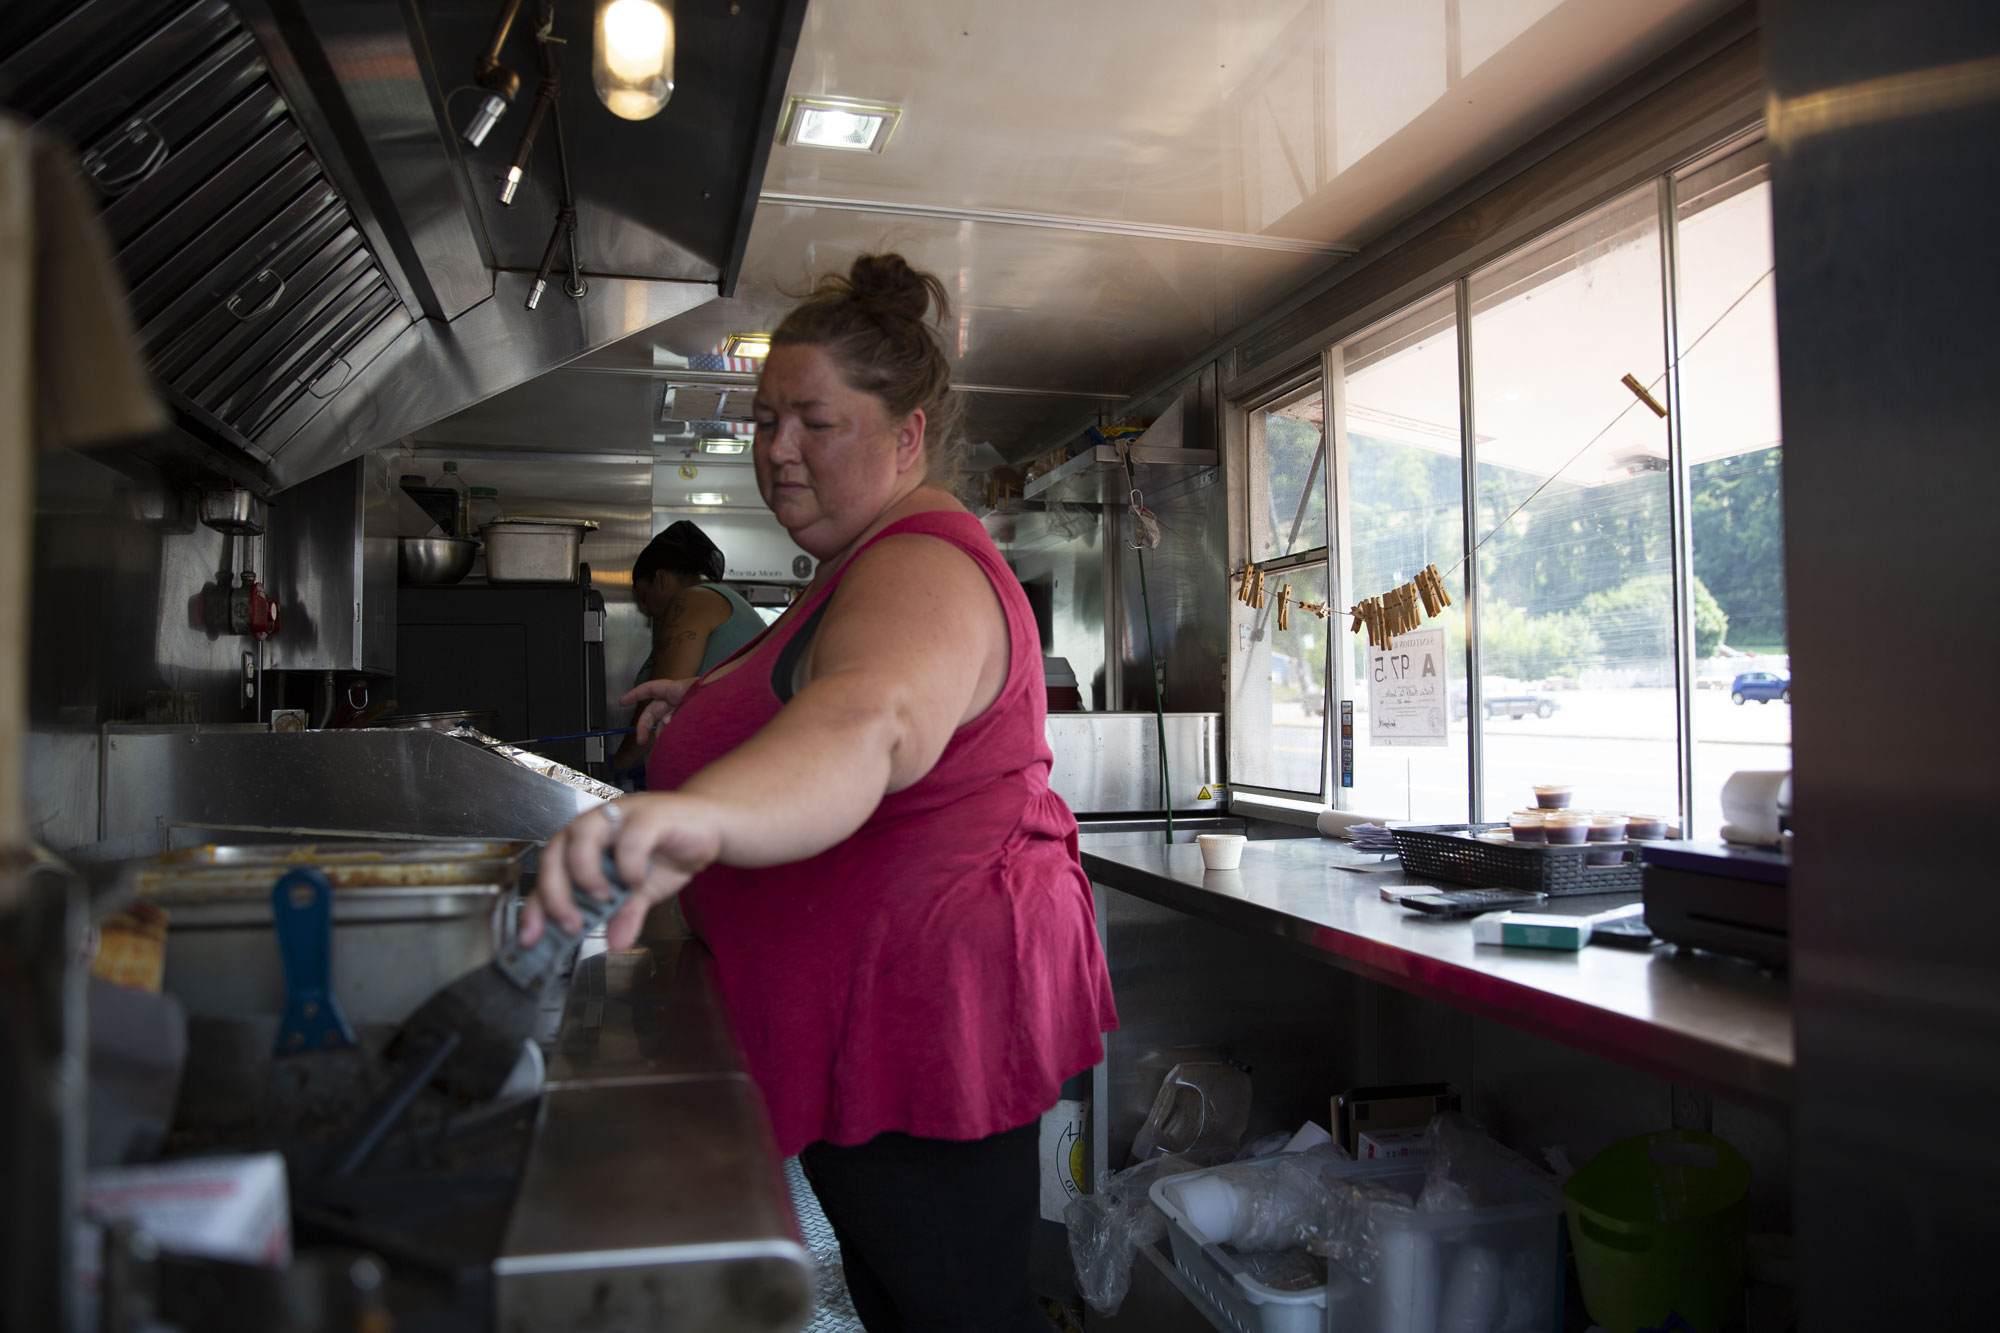 A woman in red reaches for a cooking instrument in a food cart